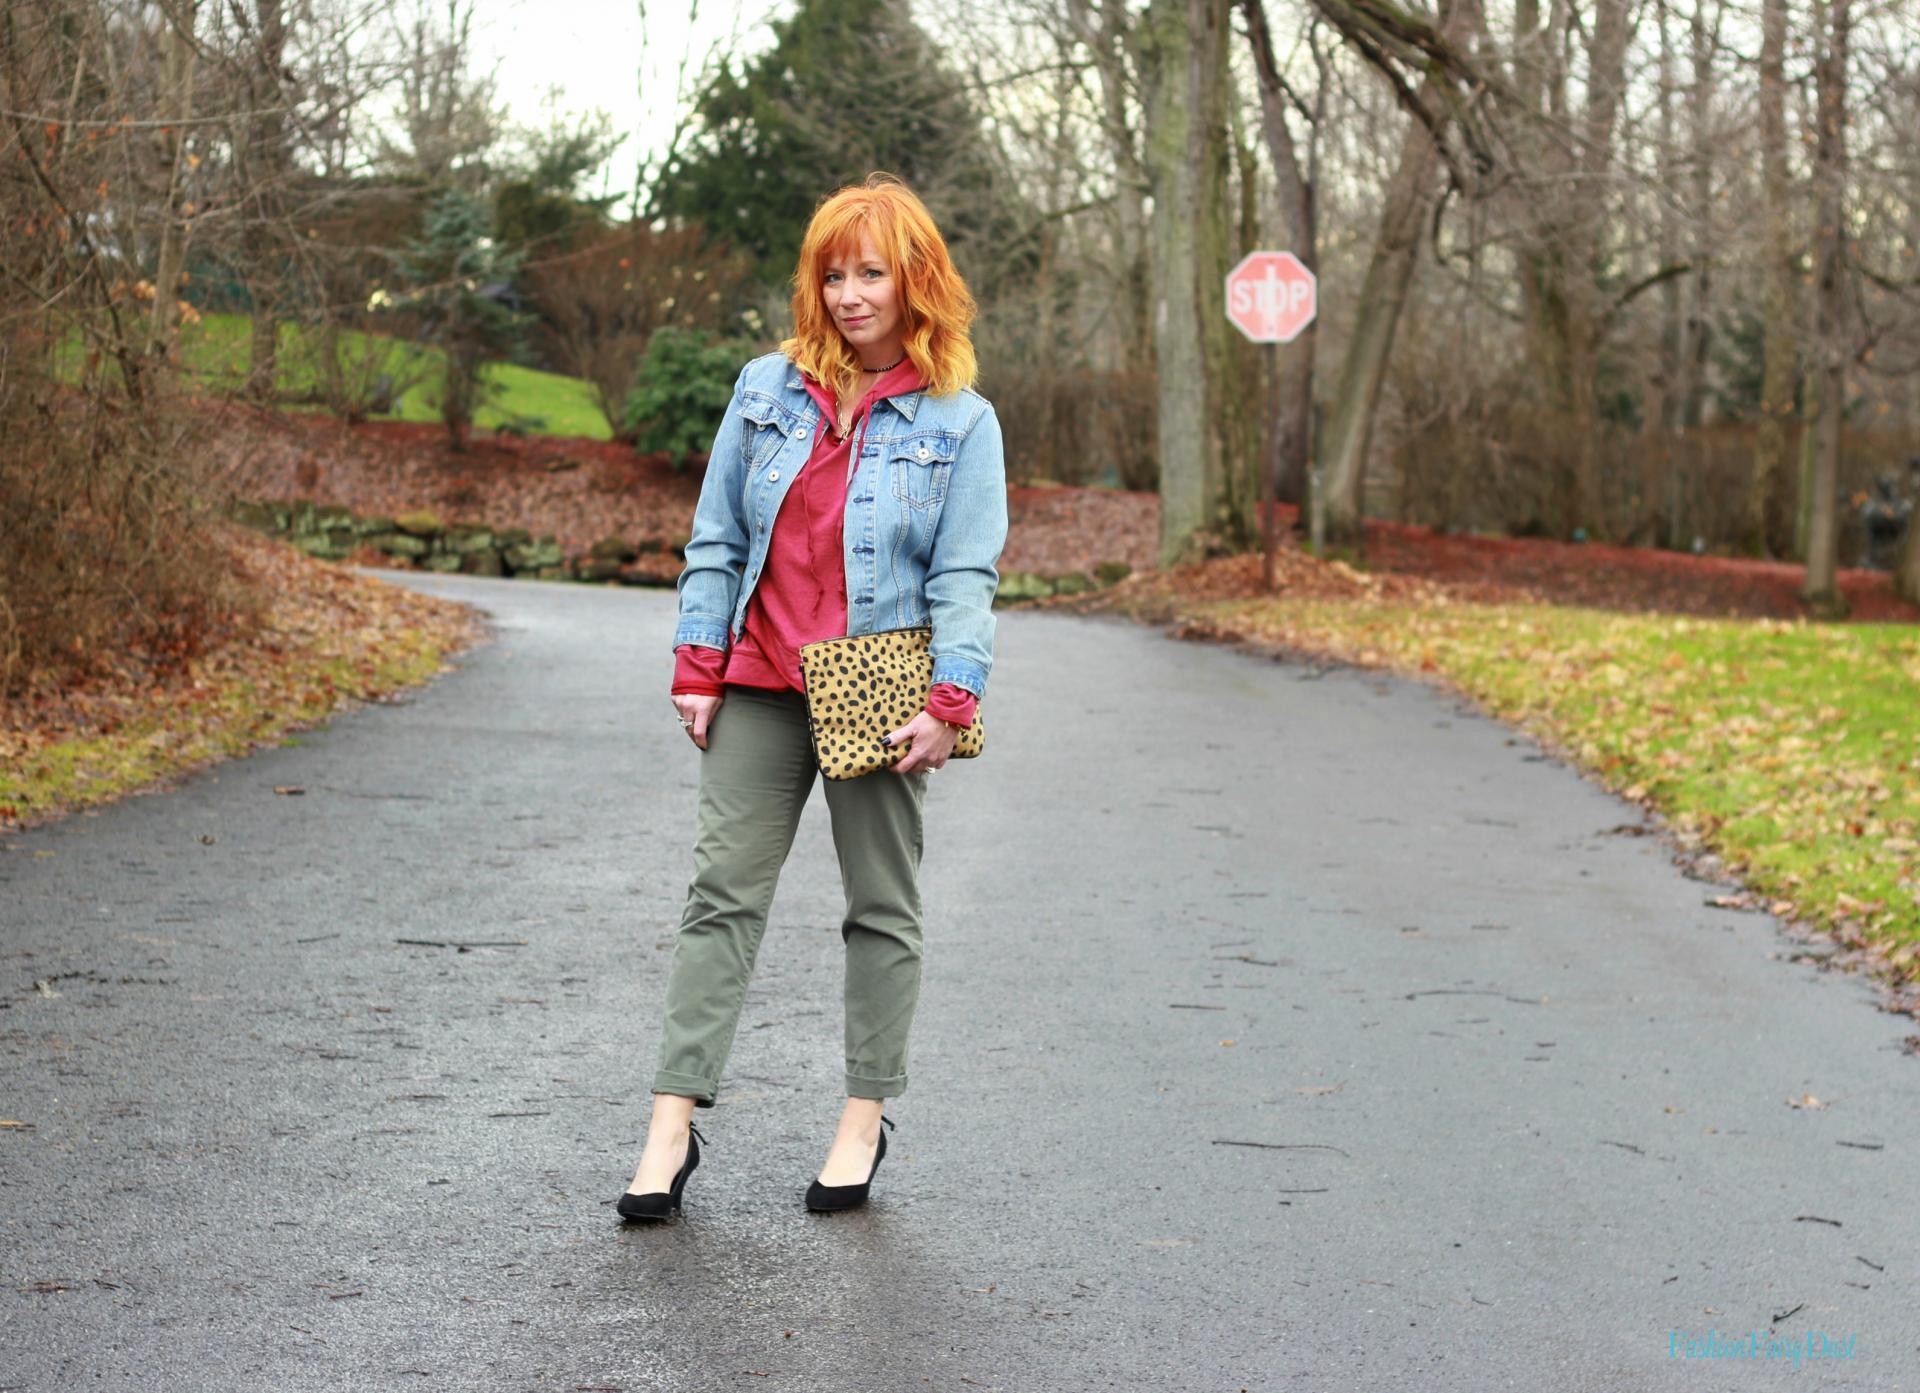 Red hooded sweatshirt, khakis and black pumps. How to style a sweatshirt for everyday wear.